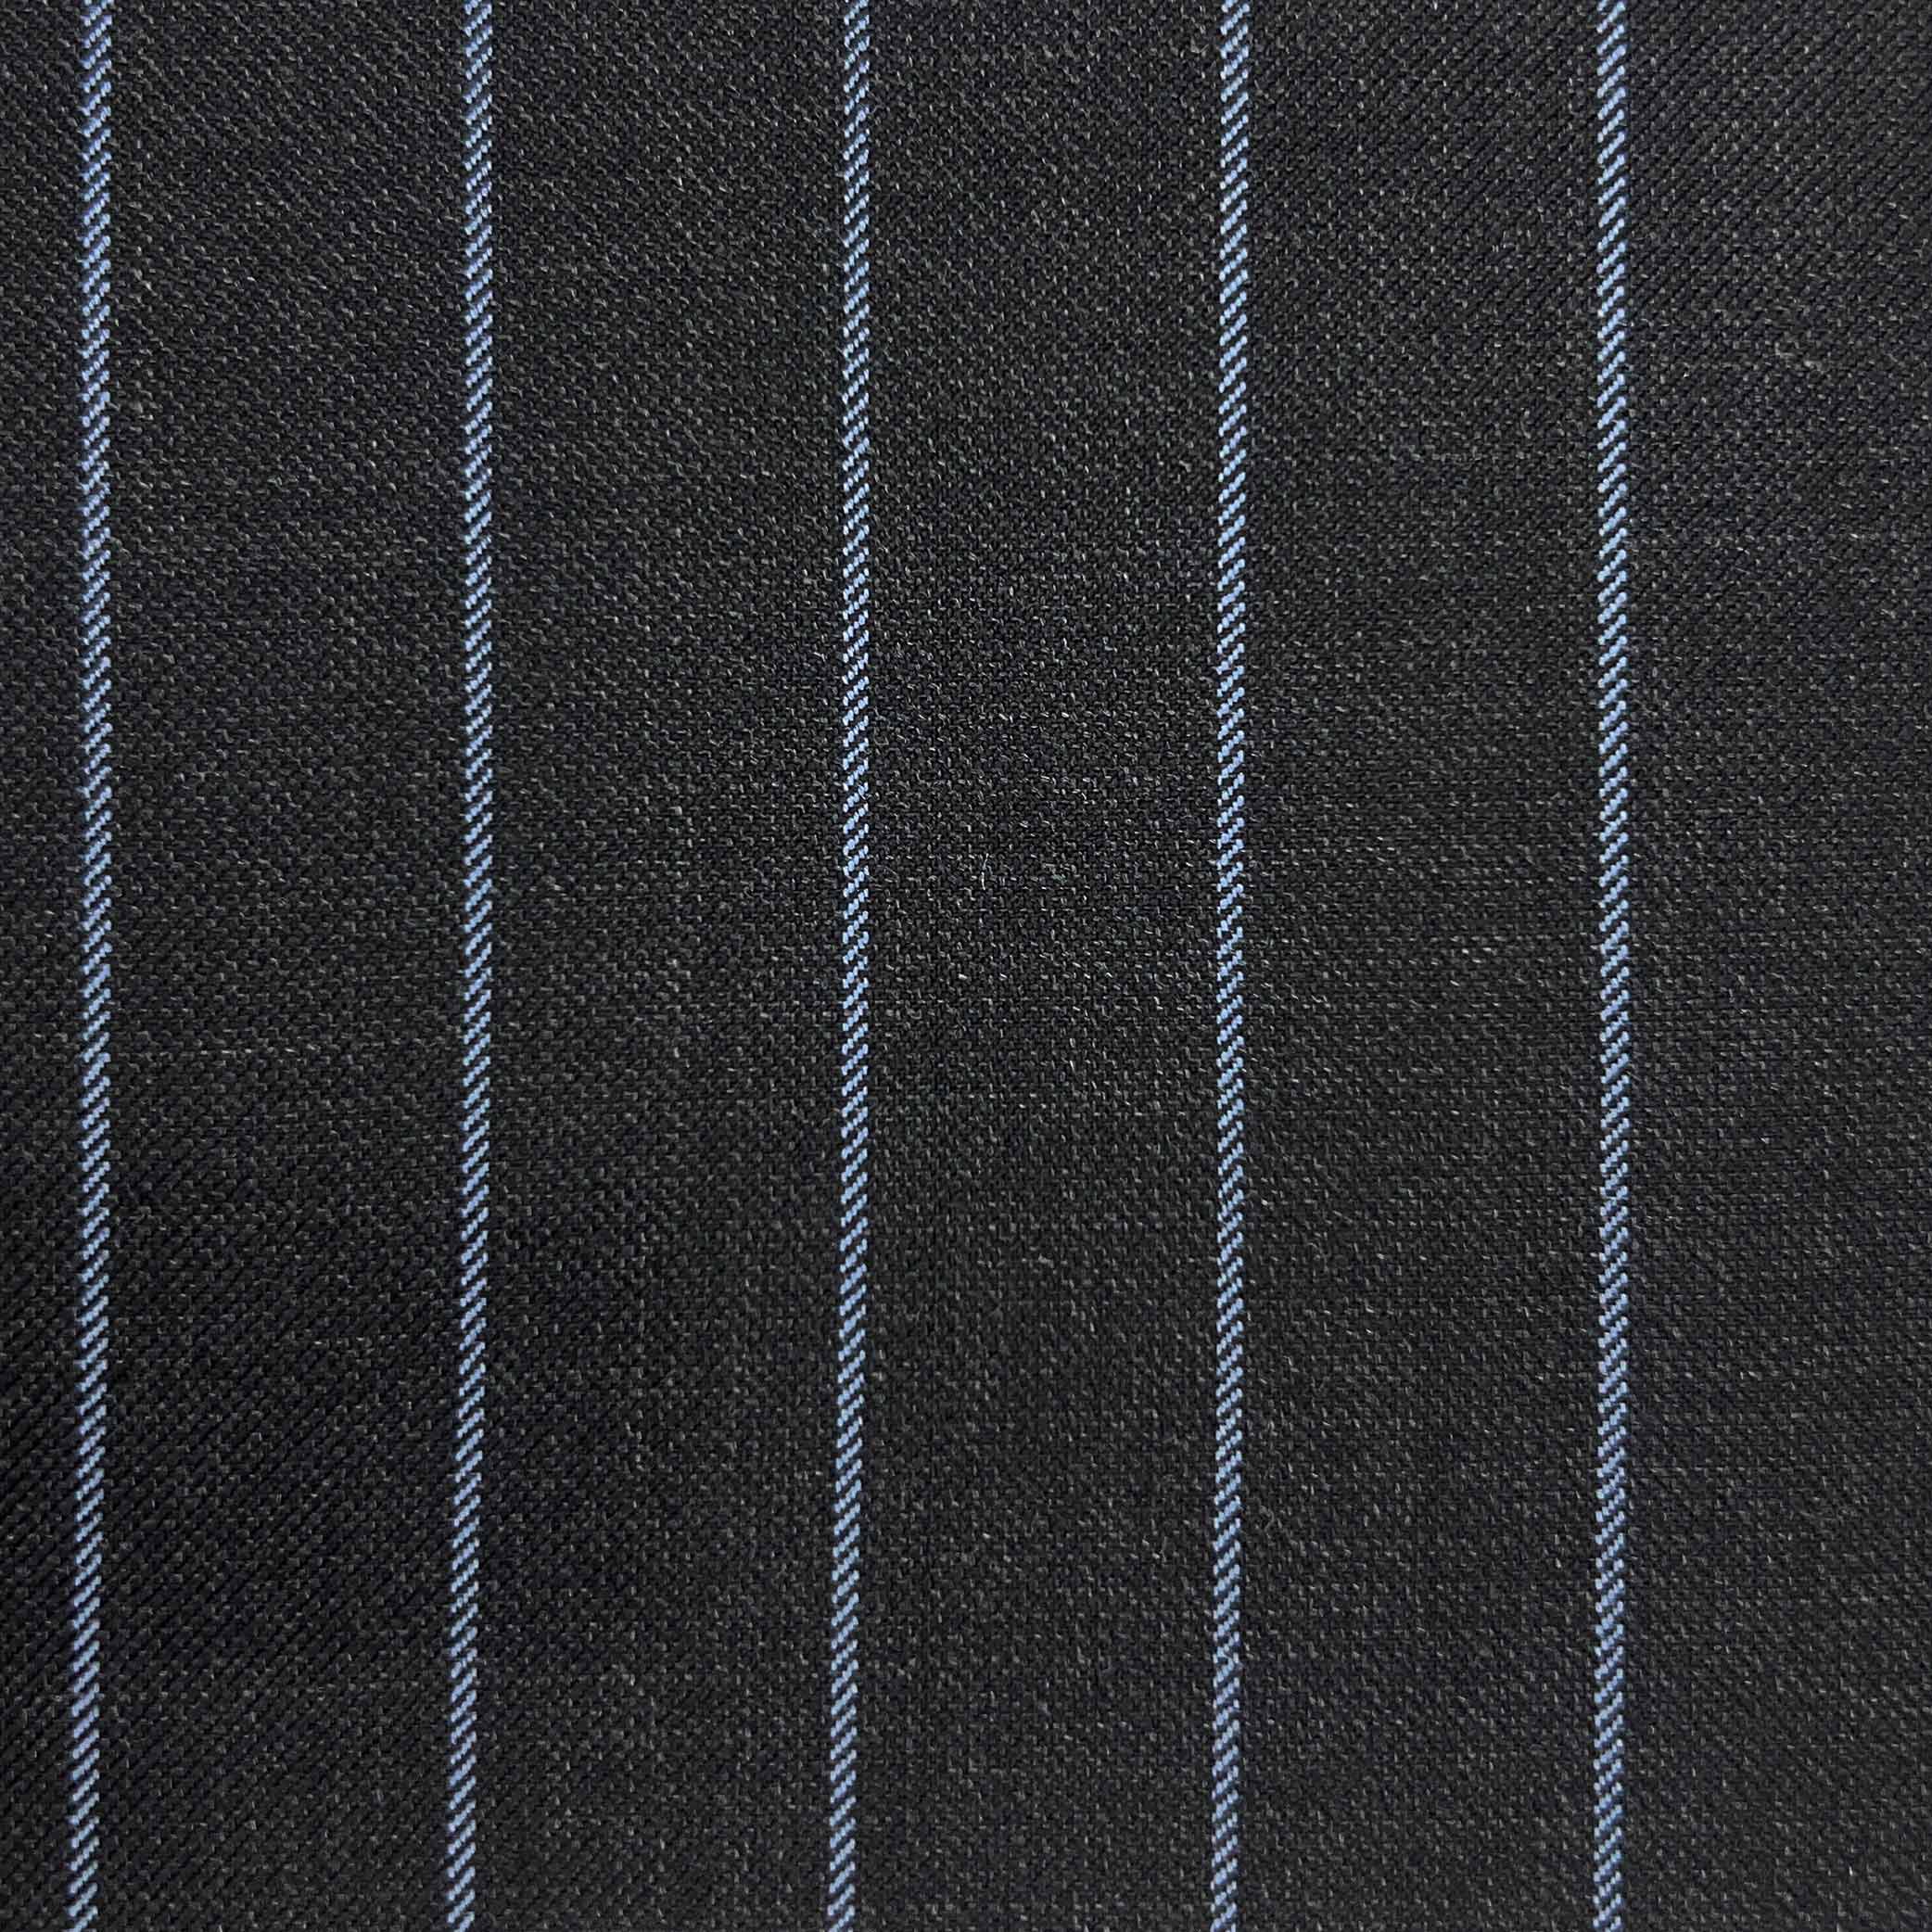 Westwood Hart Online Custom Hand Tailor Suits Sportcoats Trousers Waistcoats Overcoats Charcoal Black With 3/4" Wide Bold Stripes Design